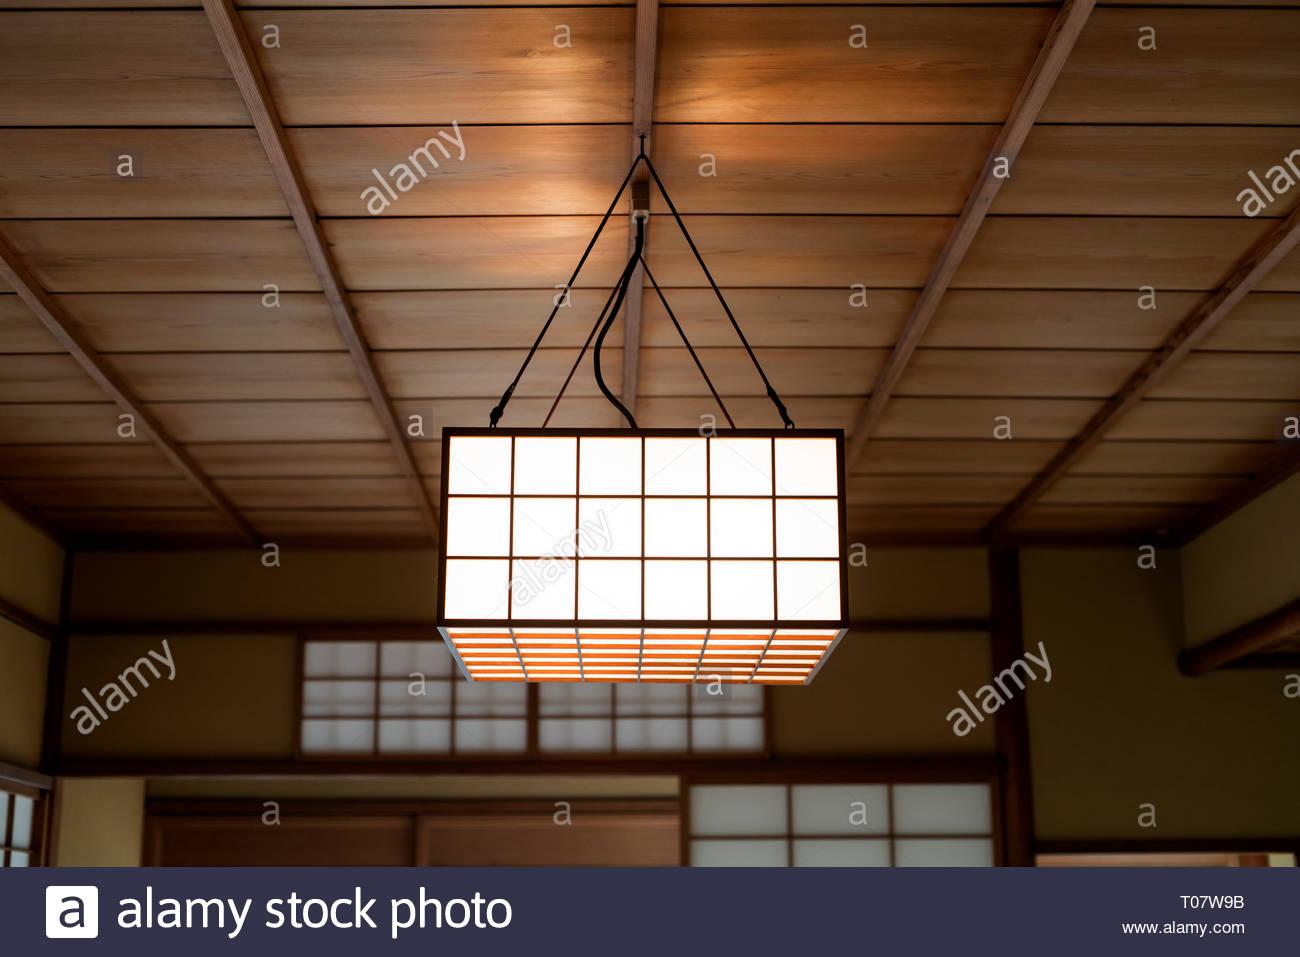 Ceiling With Light In A Traditional Japanese Garden Teahouse Stock